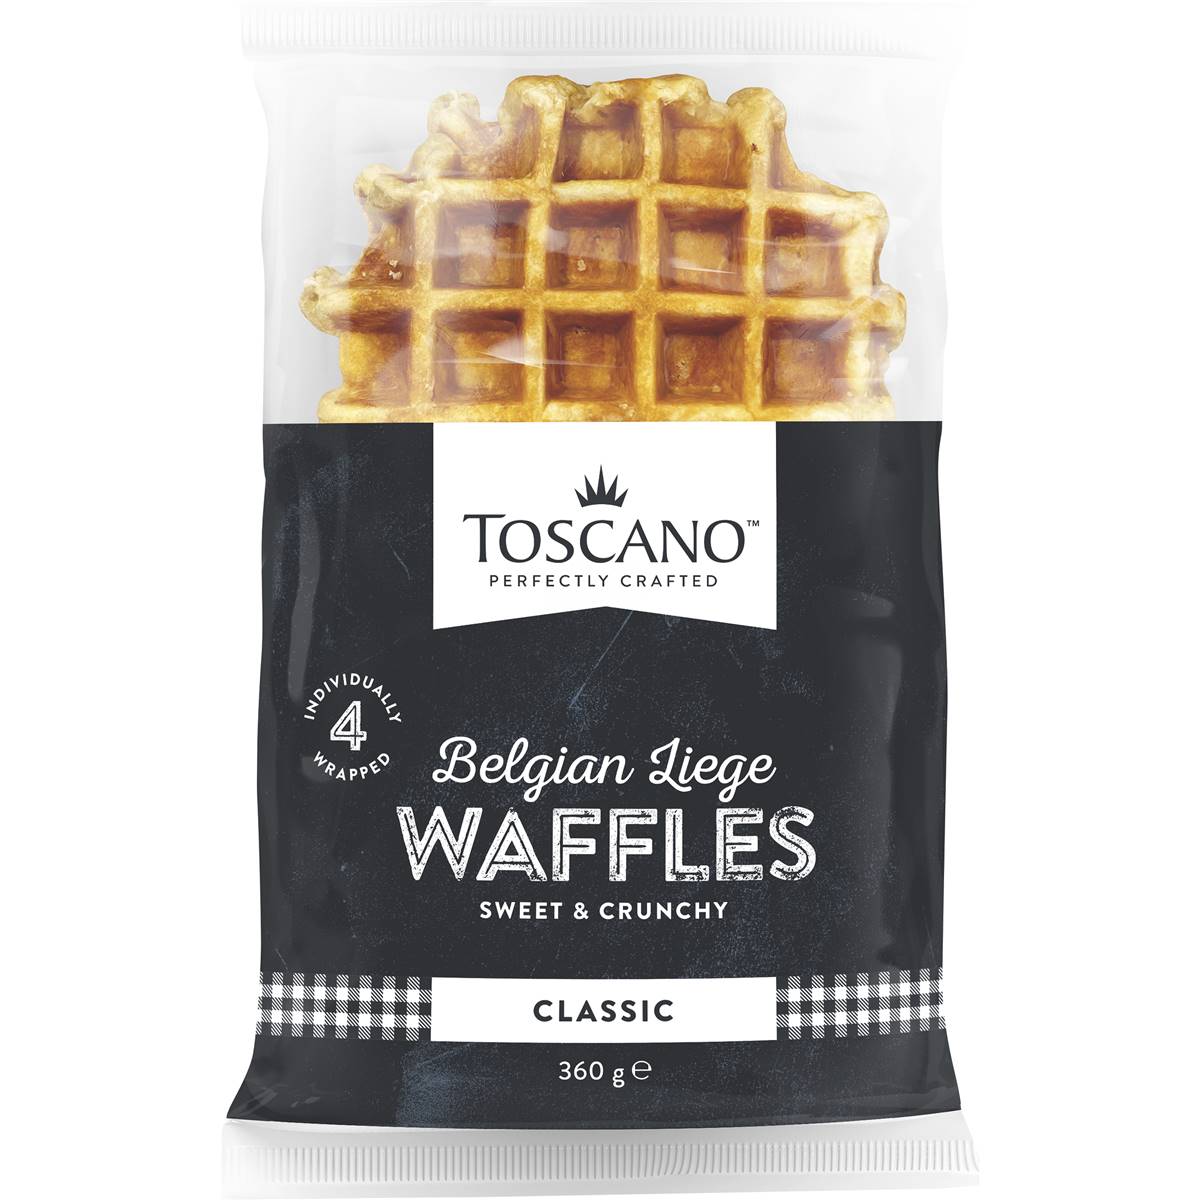 Calories in Toscano Waffles